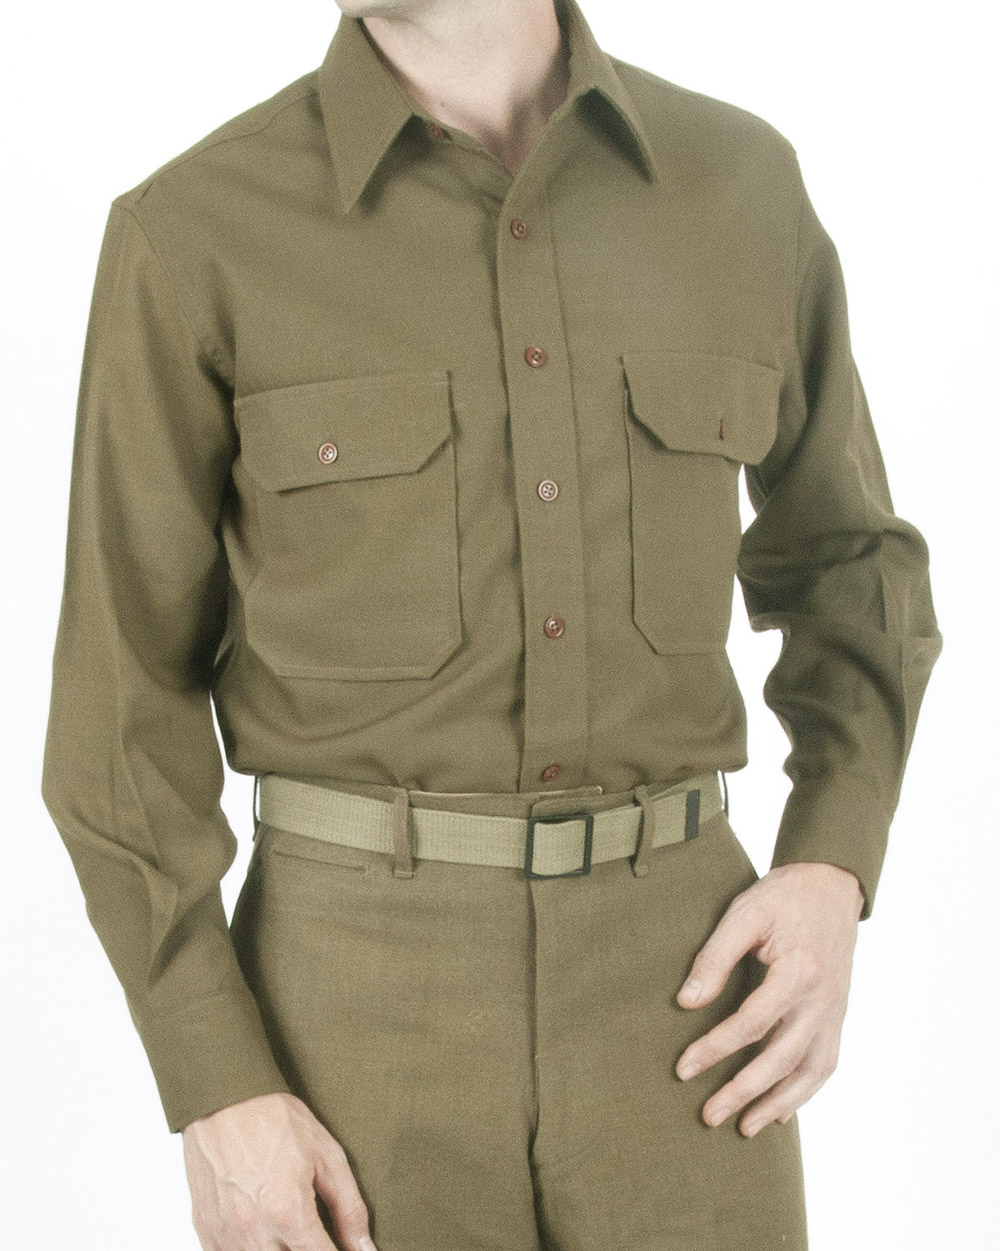 US Army WWII M37 Wool Shirt